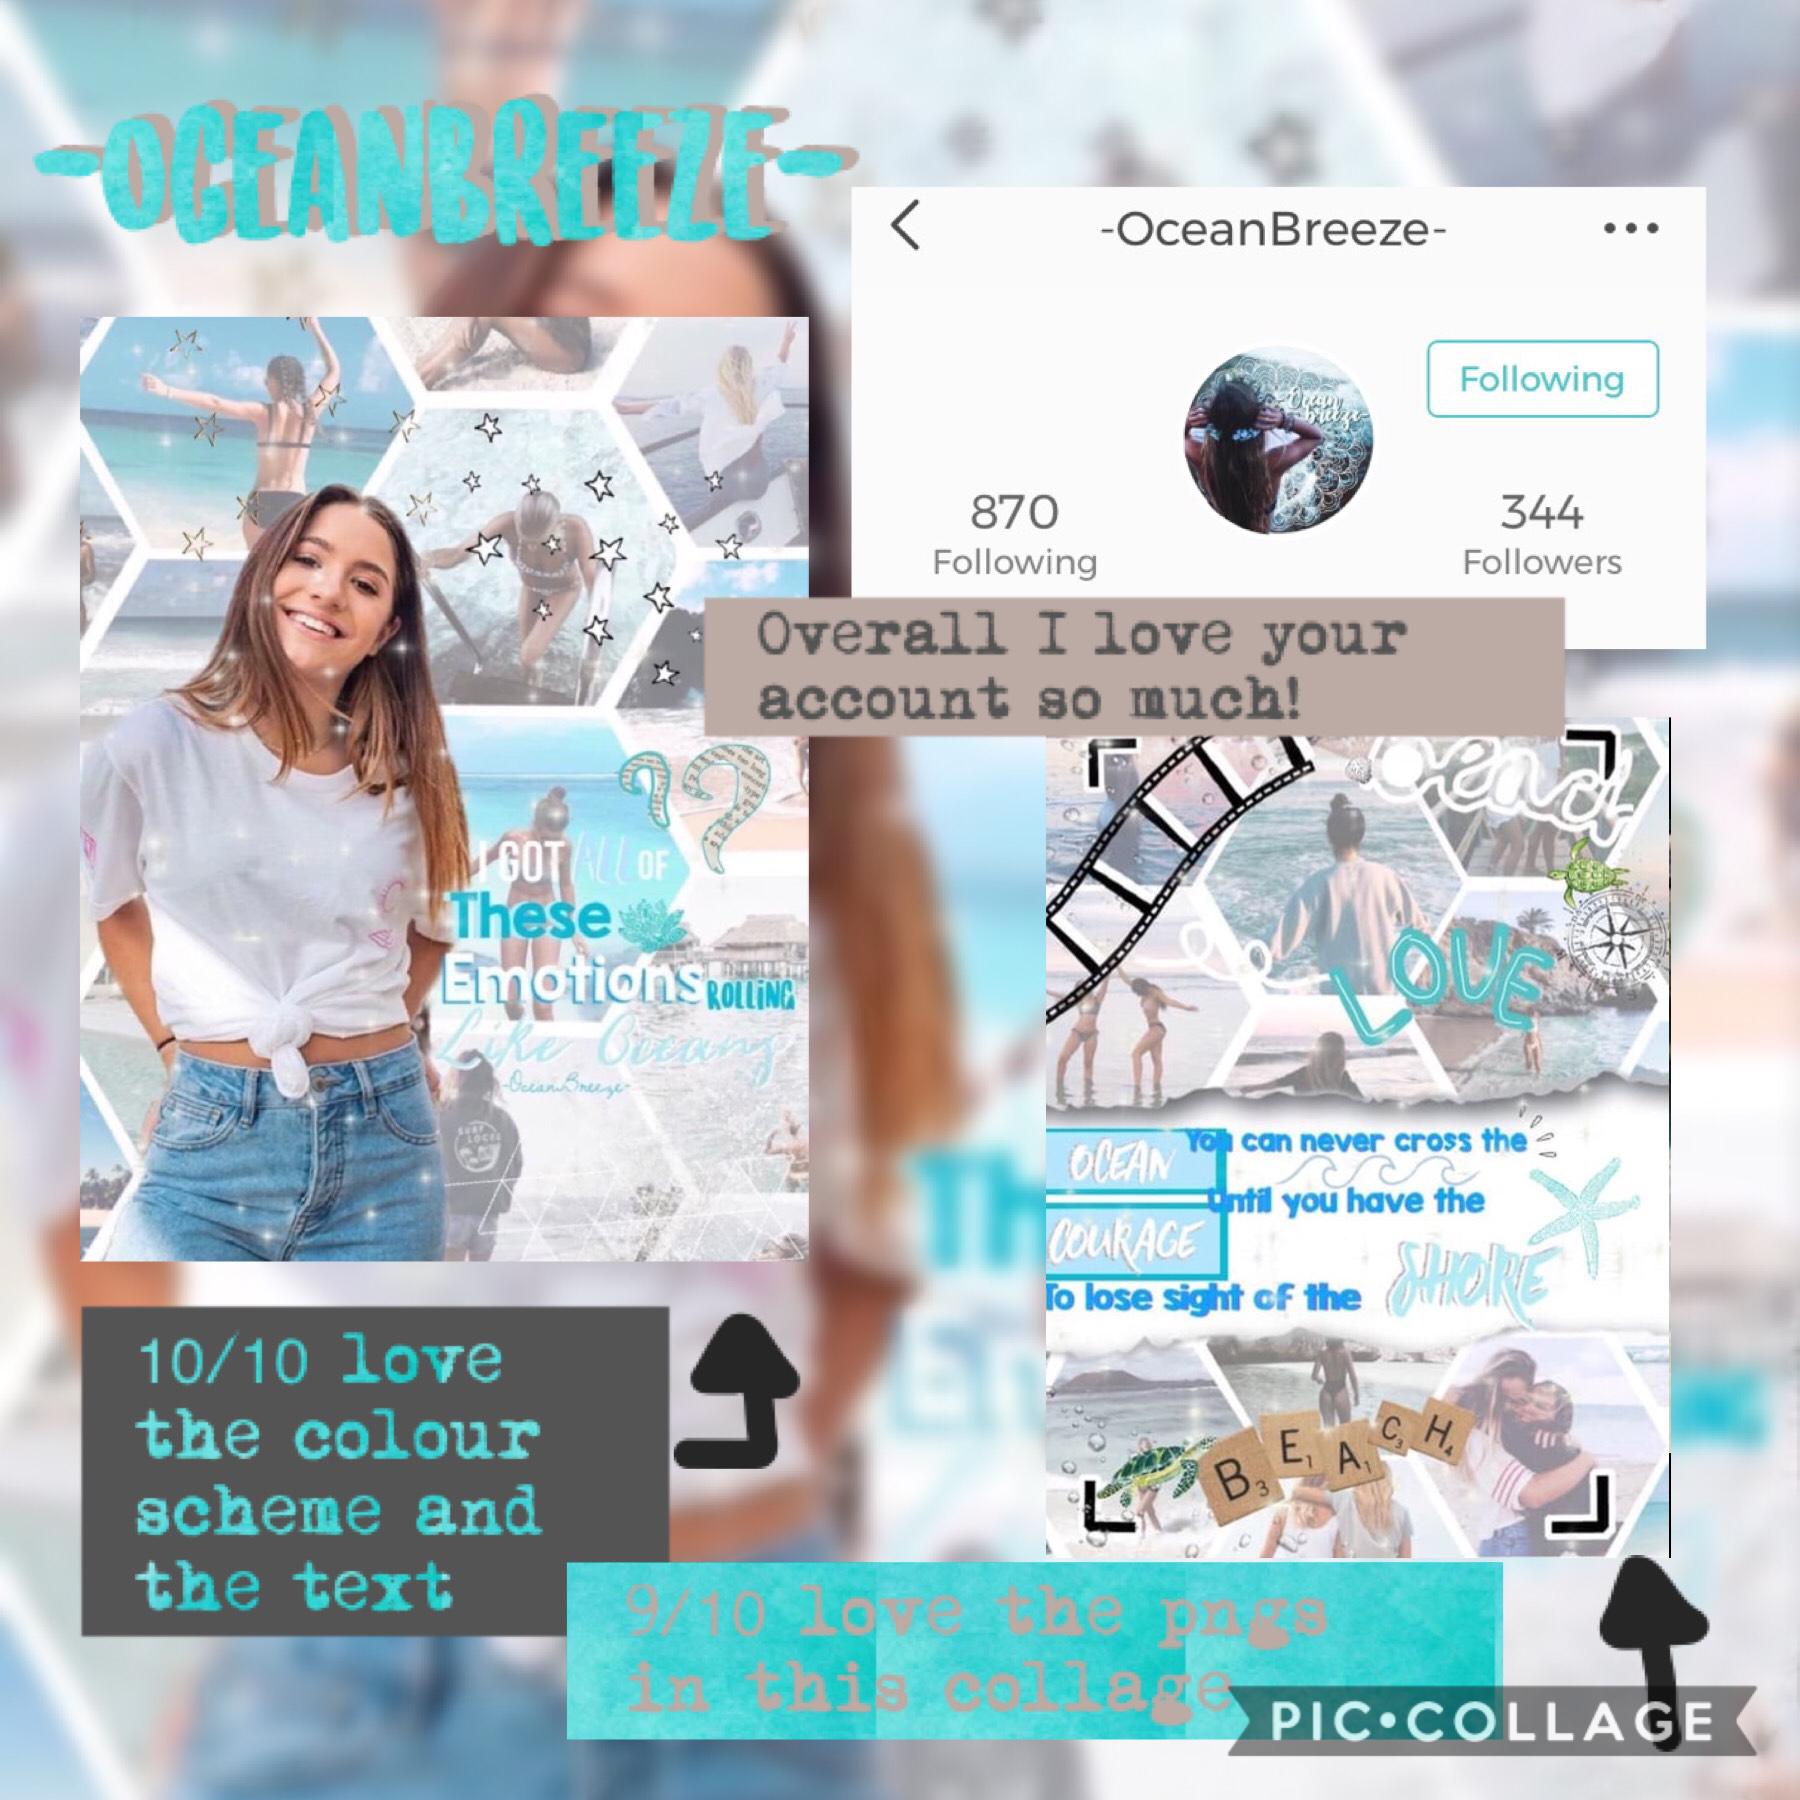 💙Tap💙
•this is a review for -OceanBreeze- she’s such a nice person defo follow her!!! 
•also will be giving one more person a review later on this week!!!